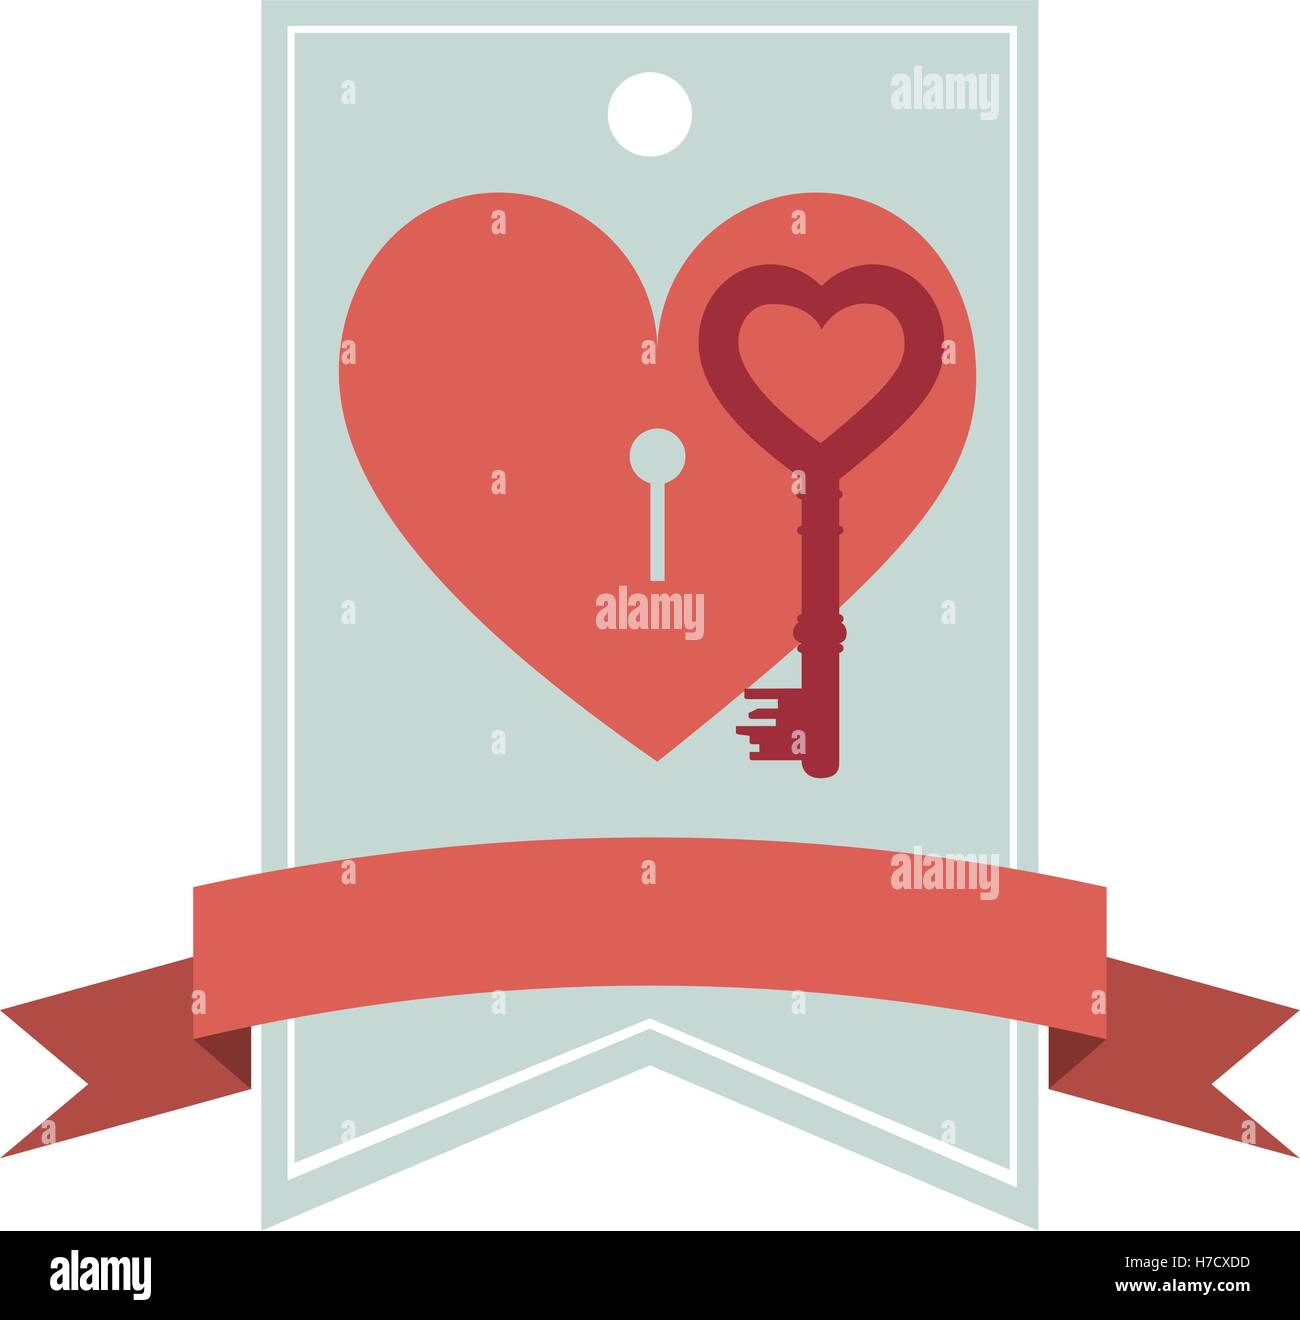 Love Lock and Key Line Art Icons Stock Vector - Illustration of